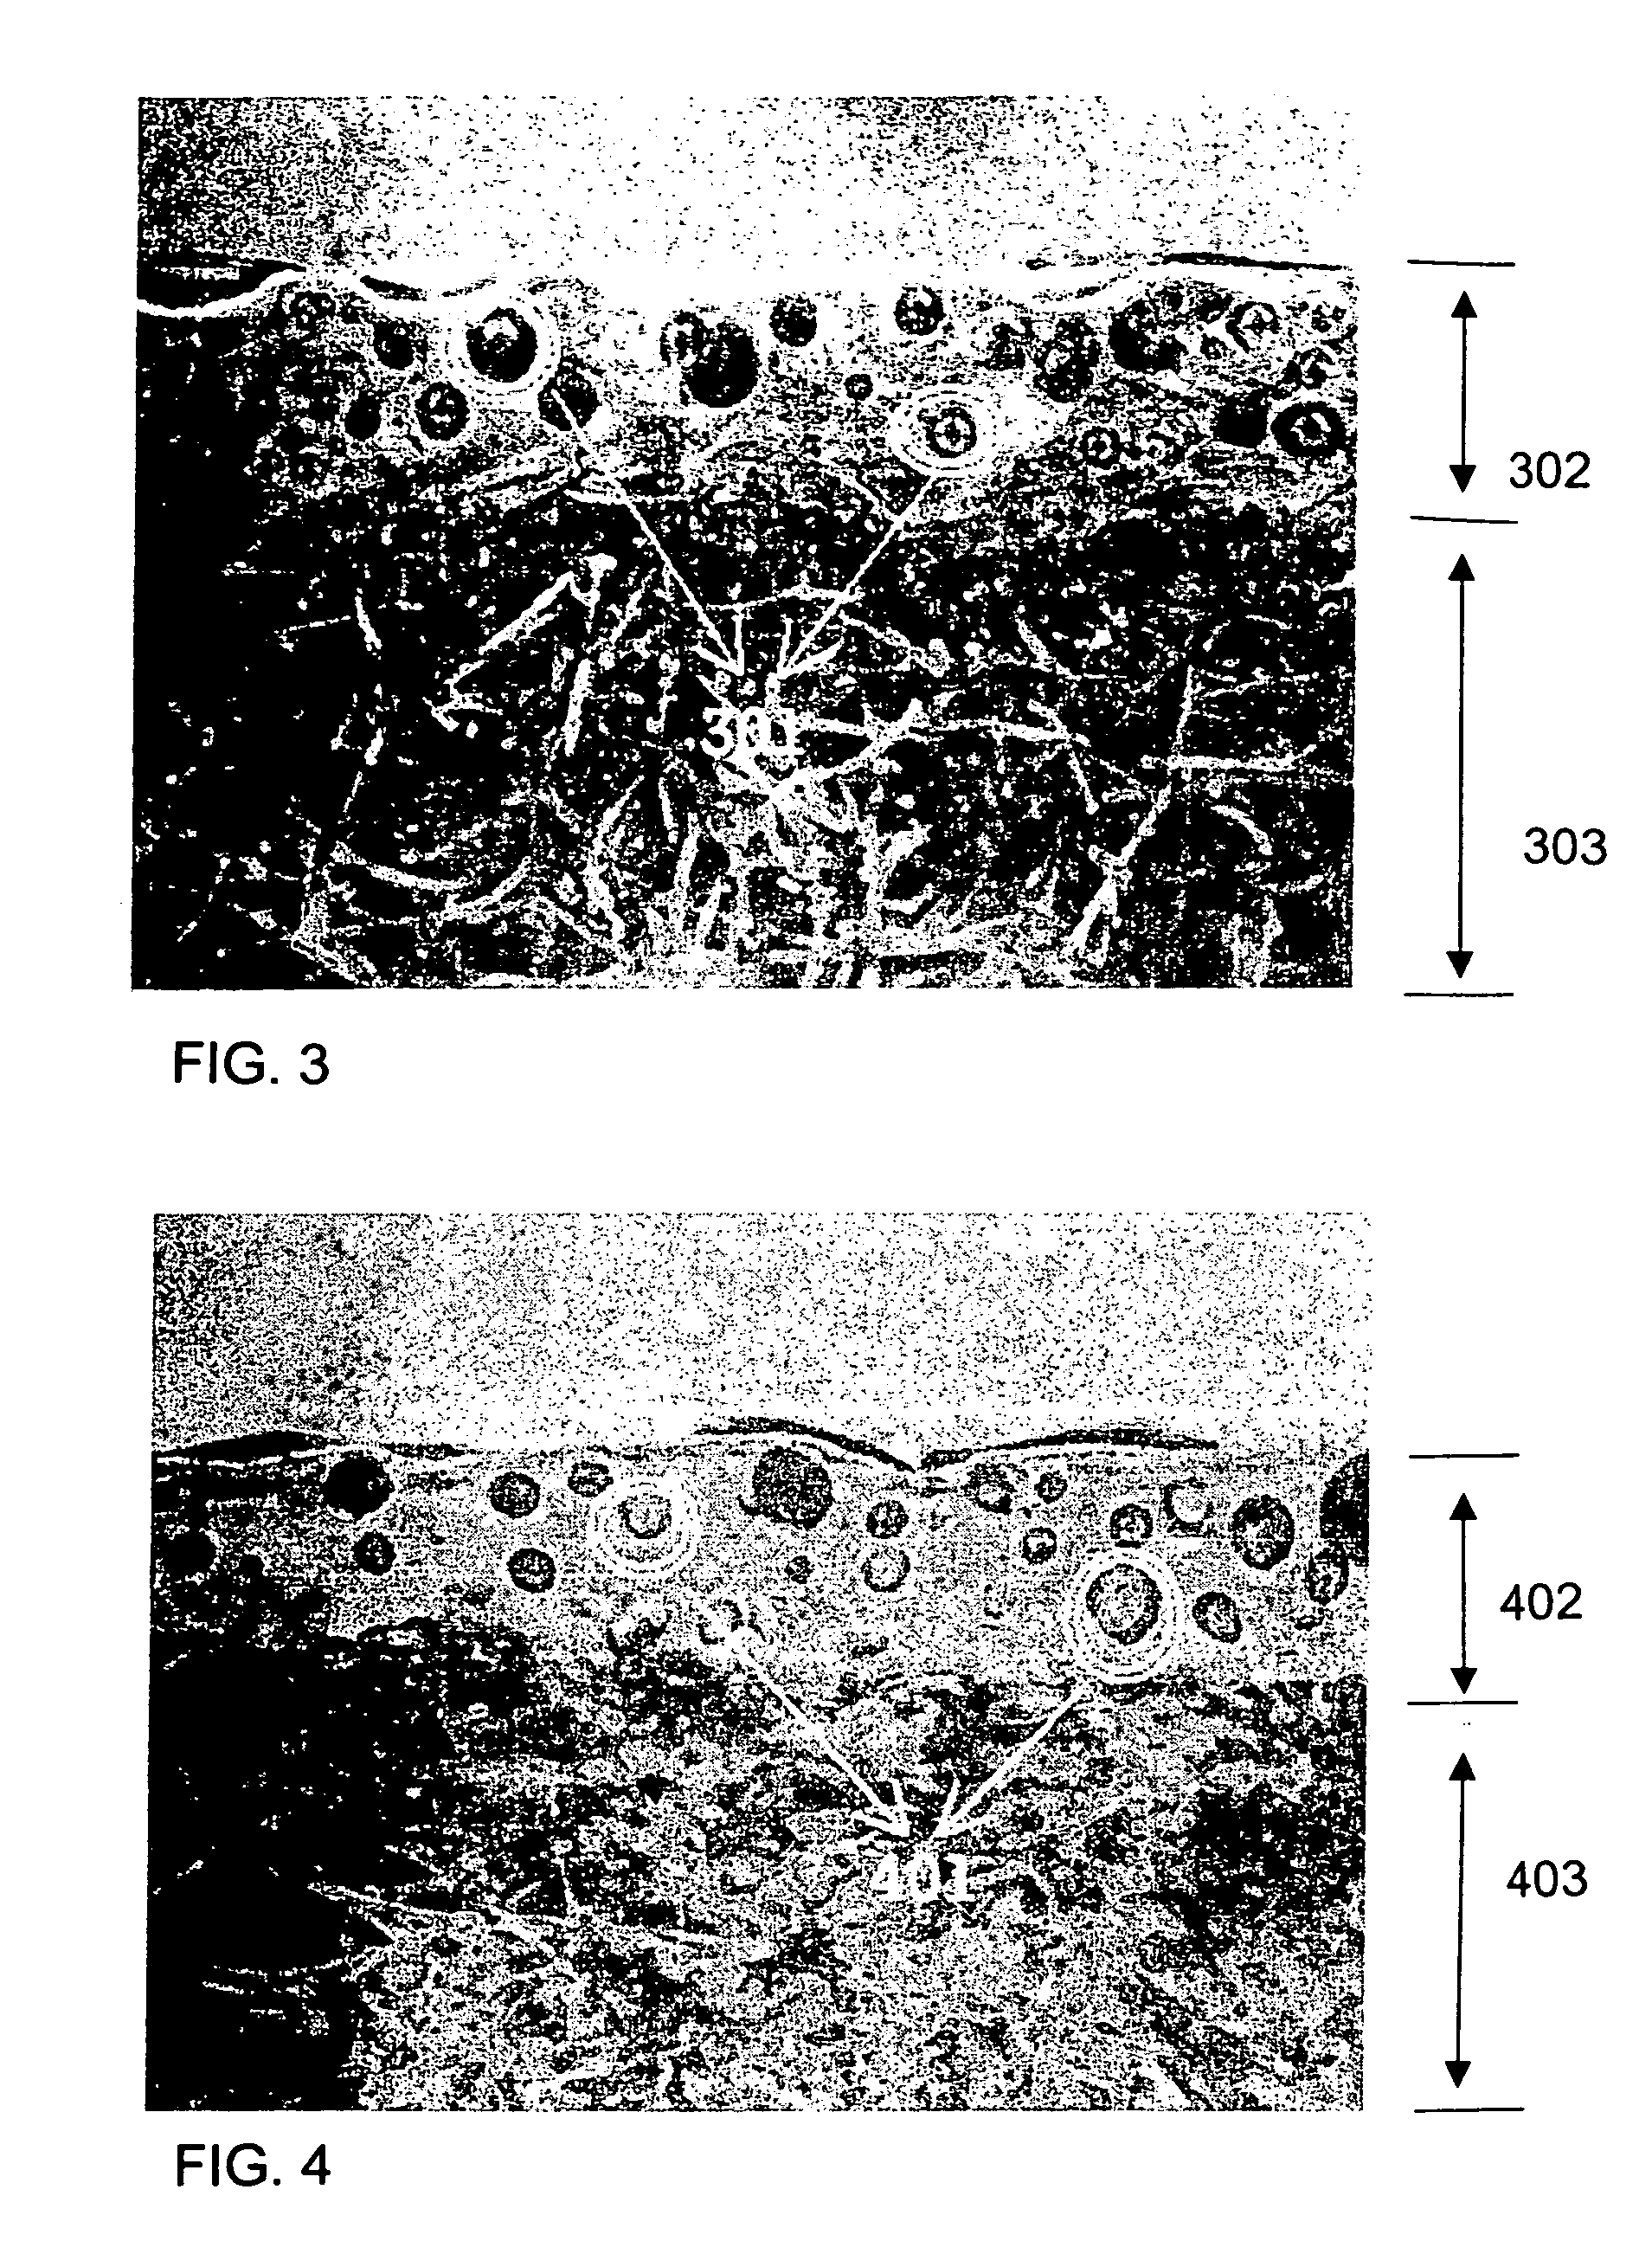 Solvent-less polyurethane foam with micro pores and method of fabricating synthetic leather therefrom